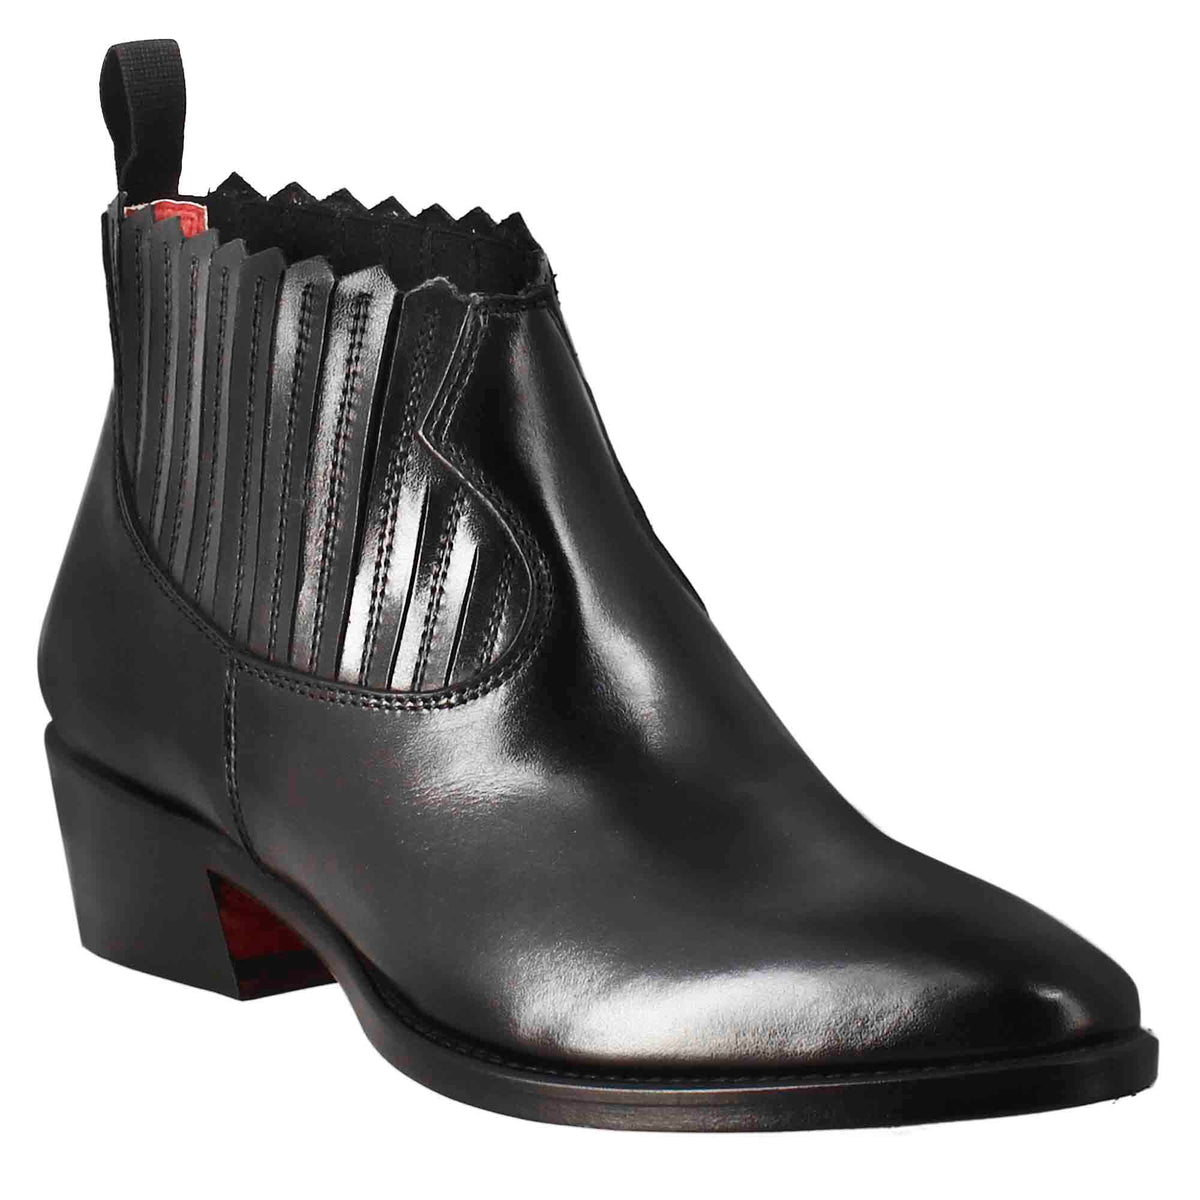 Women's ankle boot with collar cutouts in black leather